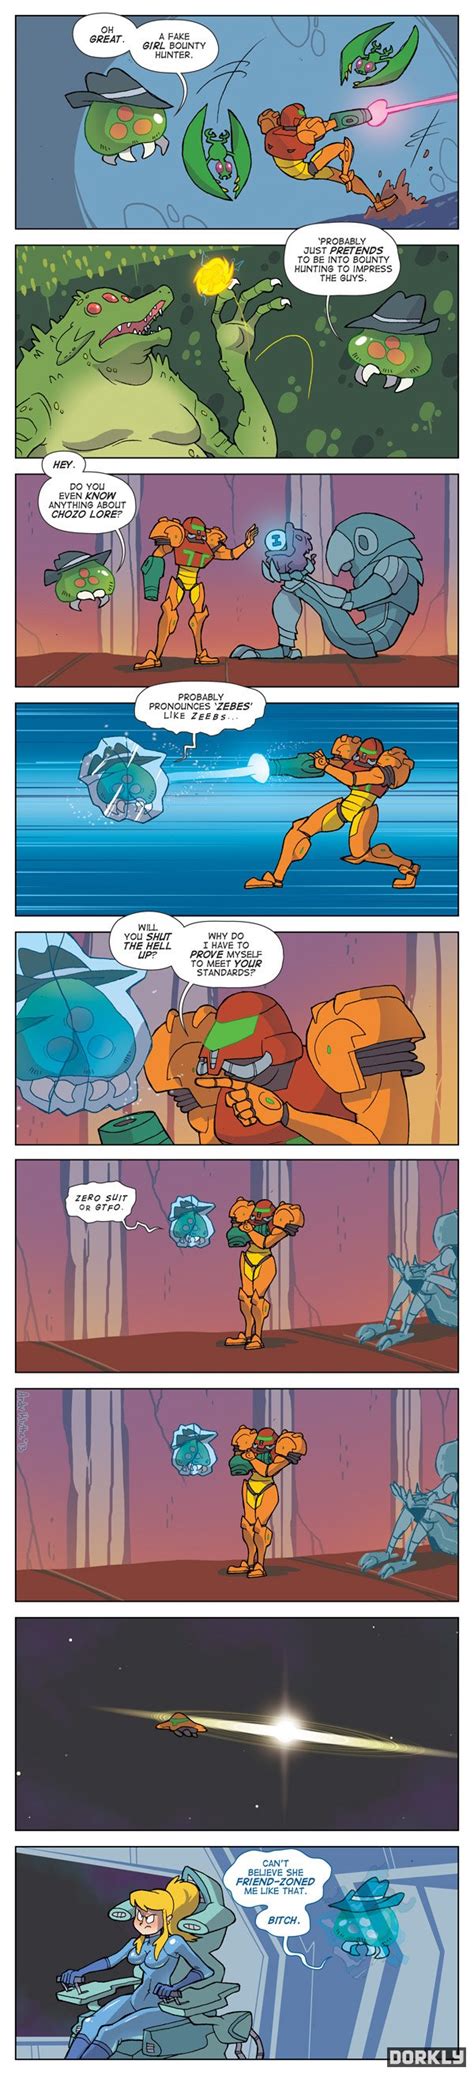 samus pictures and jokes metroid games funny pictures and best jokes comics images